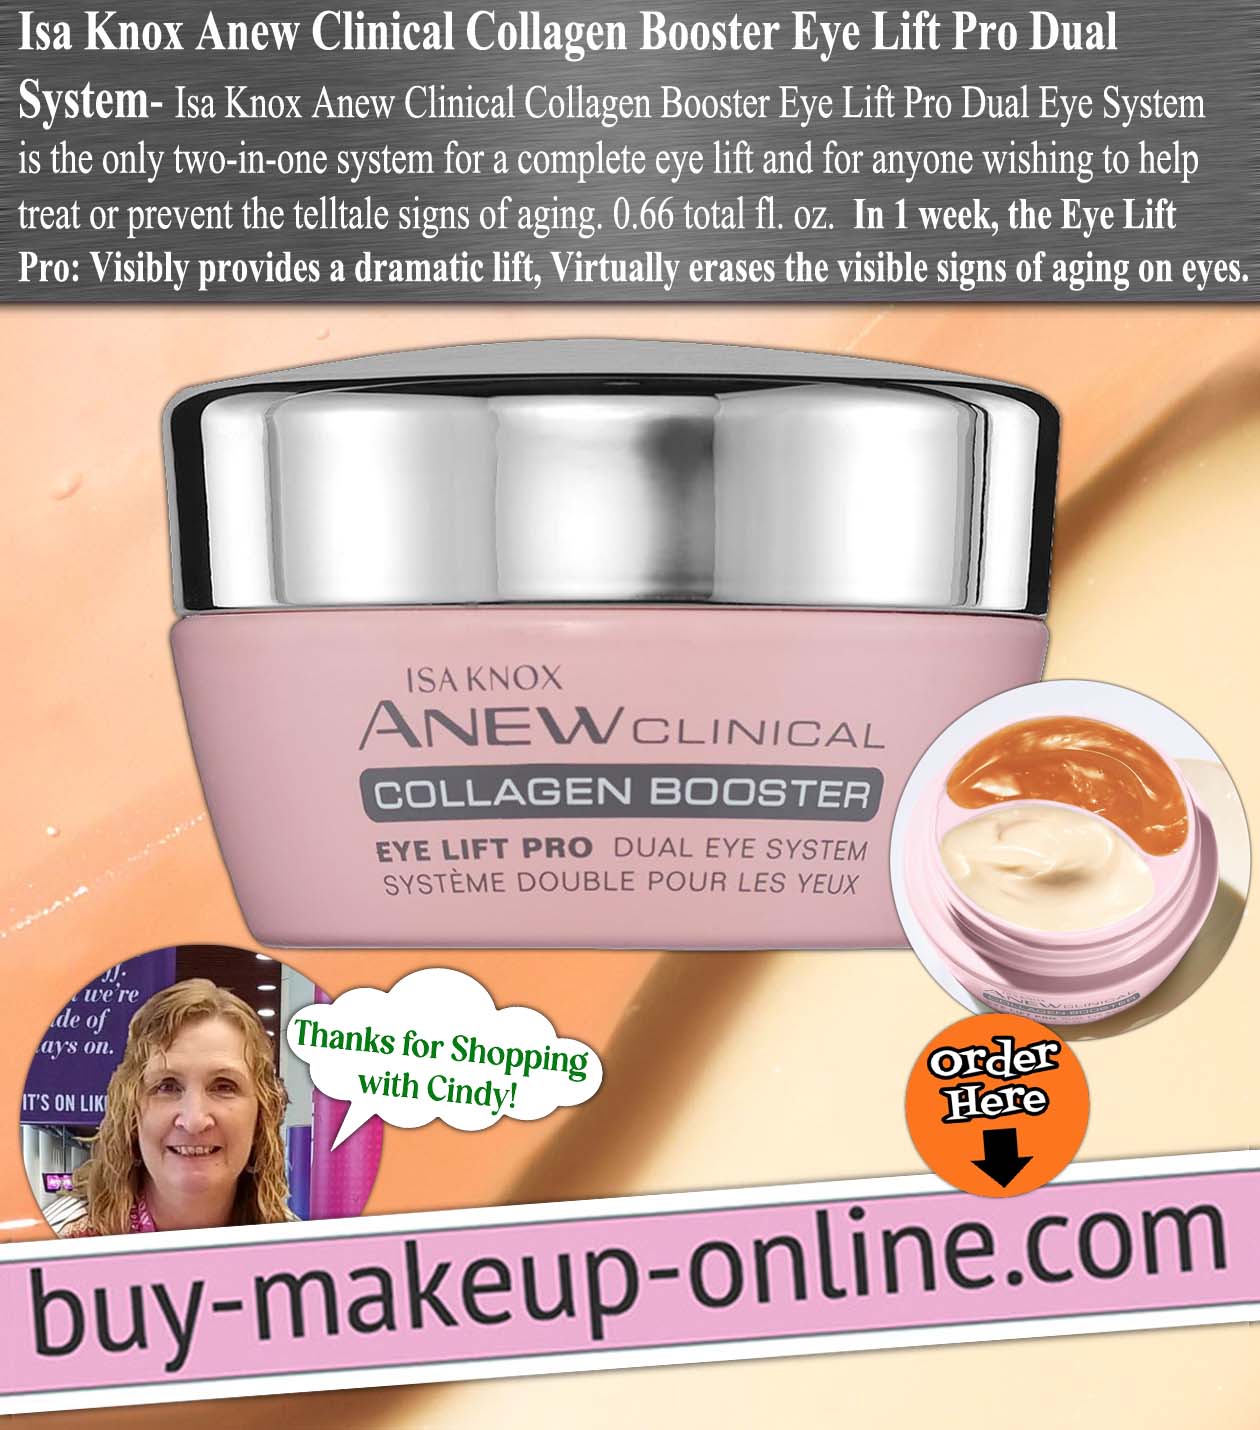 AVON Isa Knox Anew Clinical Collagen Booster Eye Lift Pro Dual System 